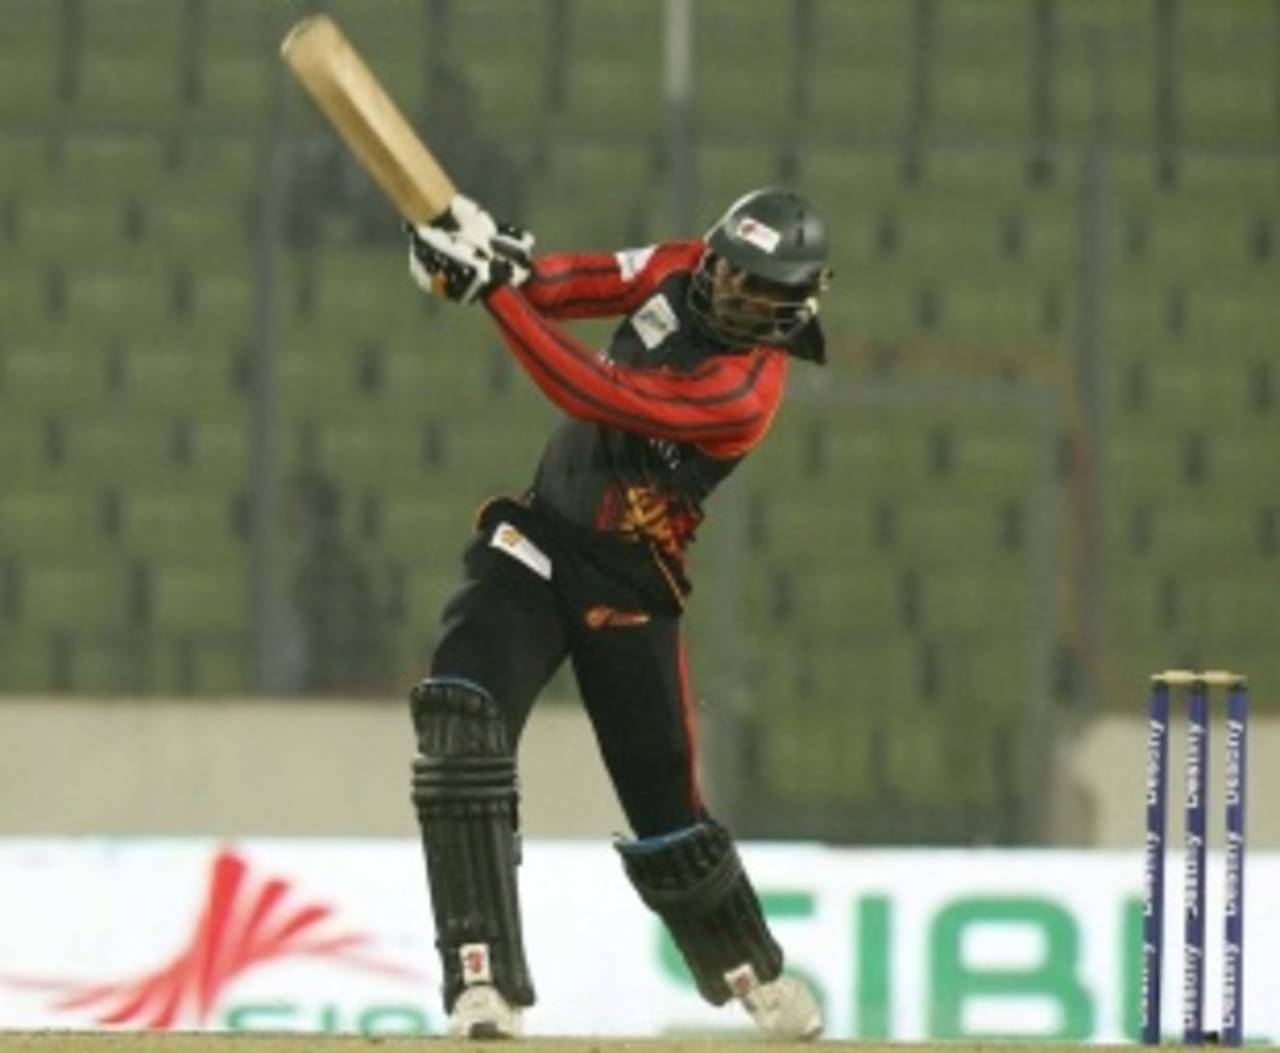 Chris Gayle injured his hamstring but sizzled in his brief stint at the BPL this year&nbsp;&nbsp;&bull;&nbsp;&nbsp;BPL T20